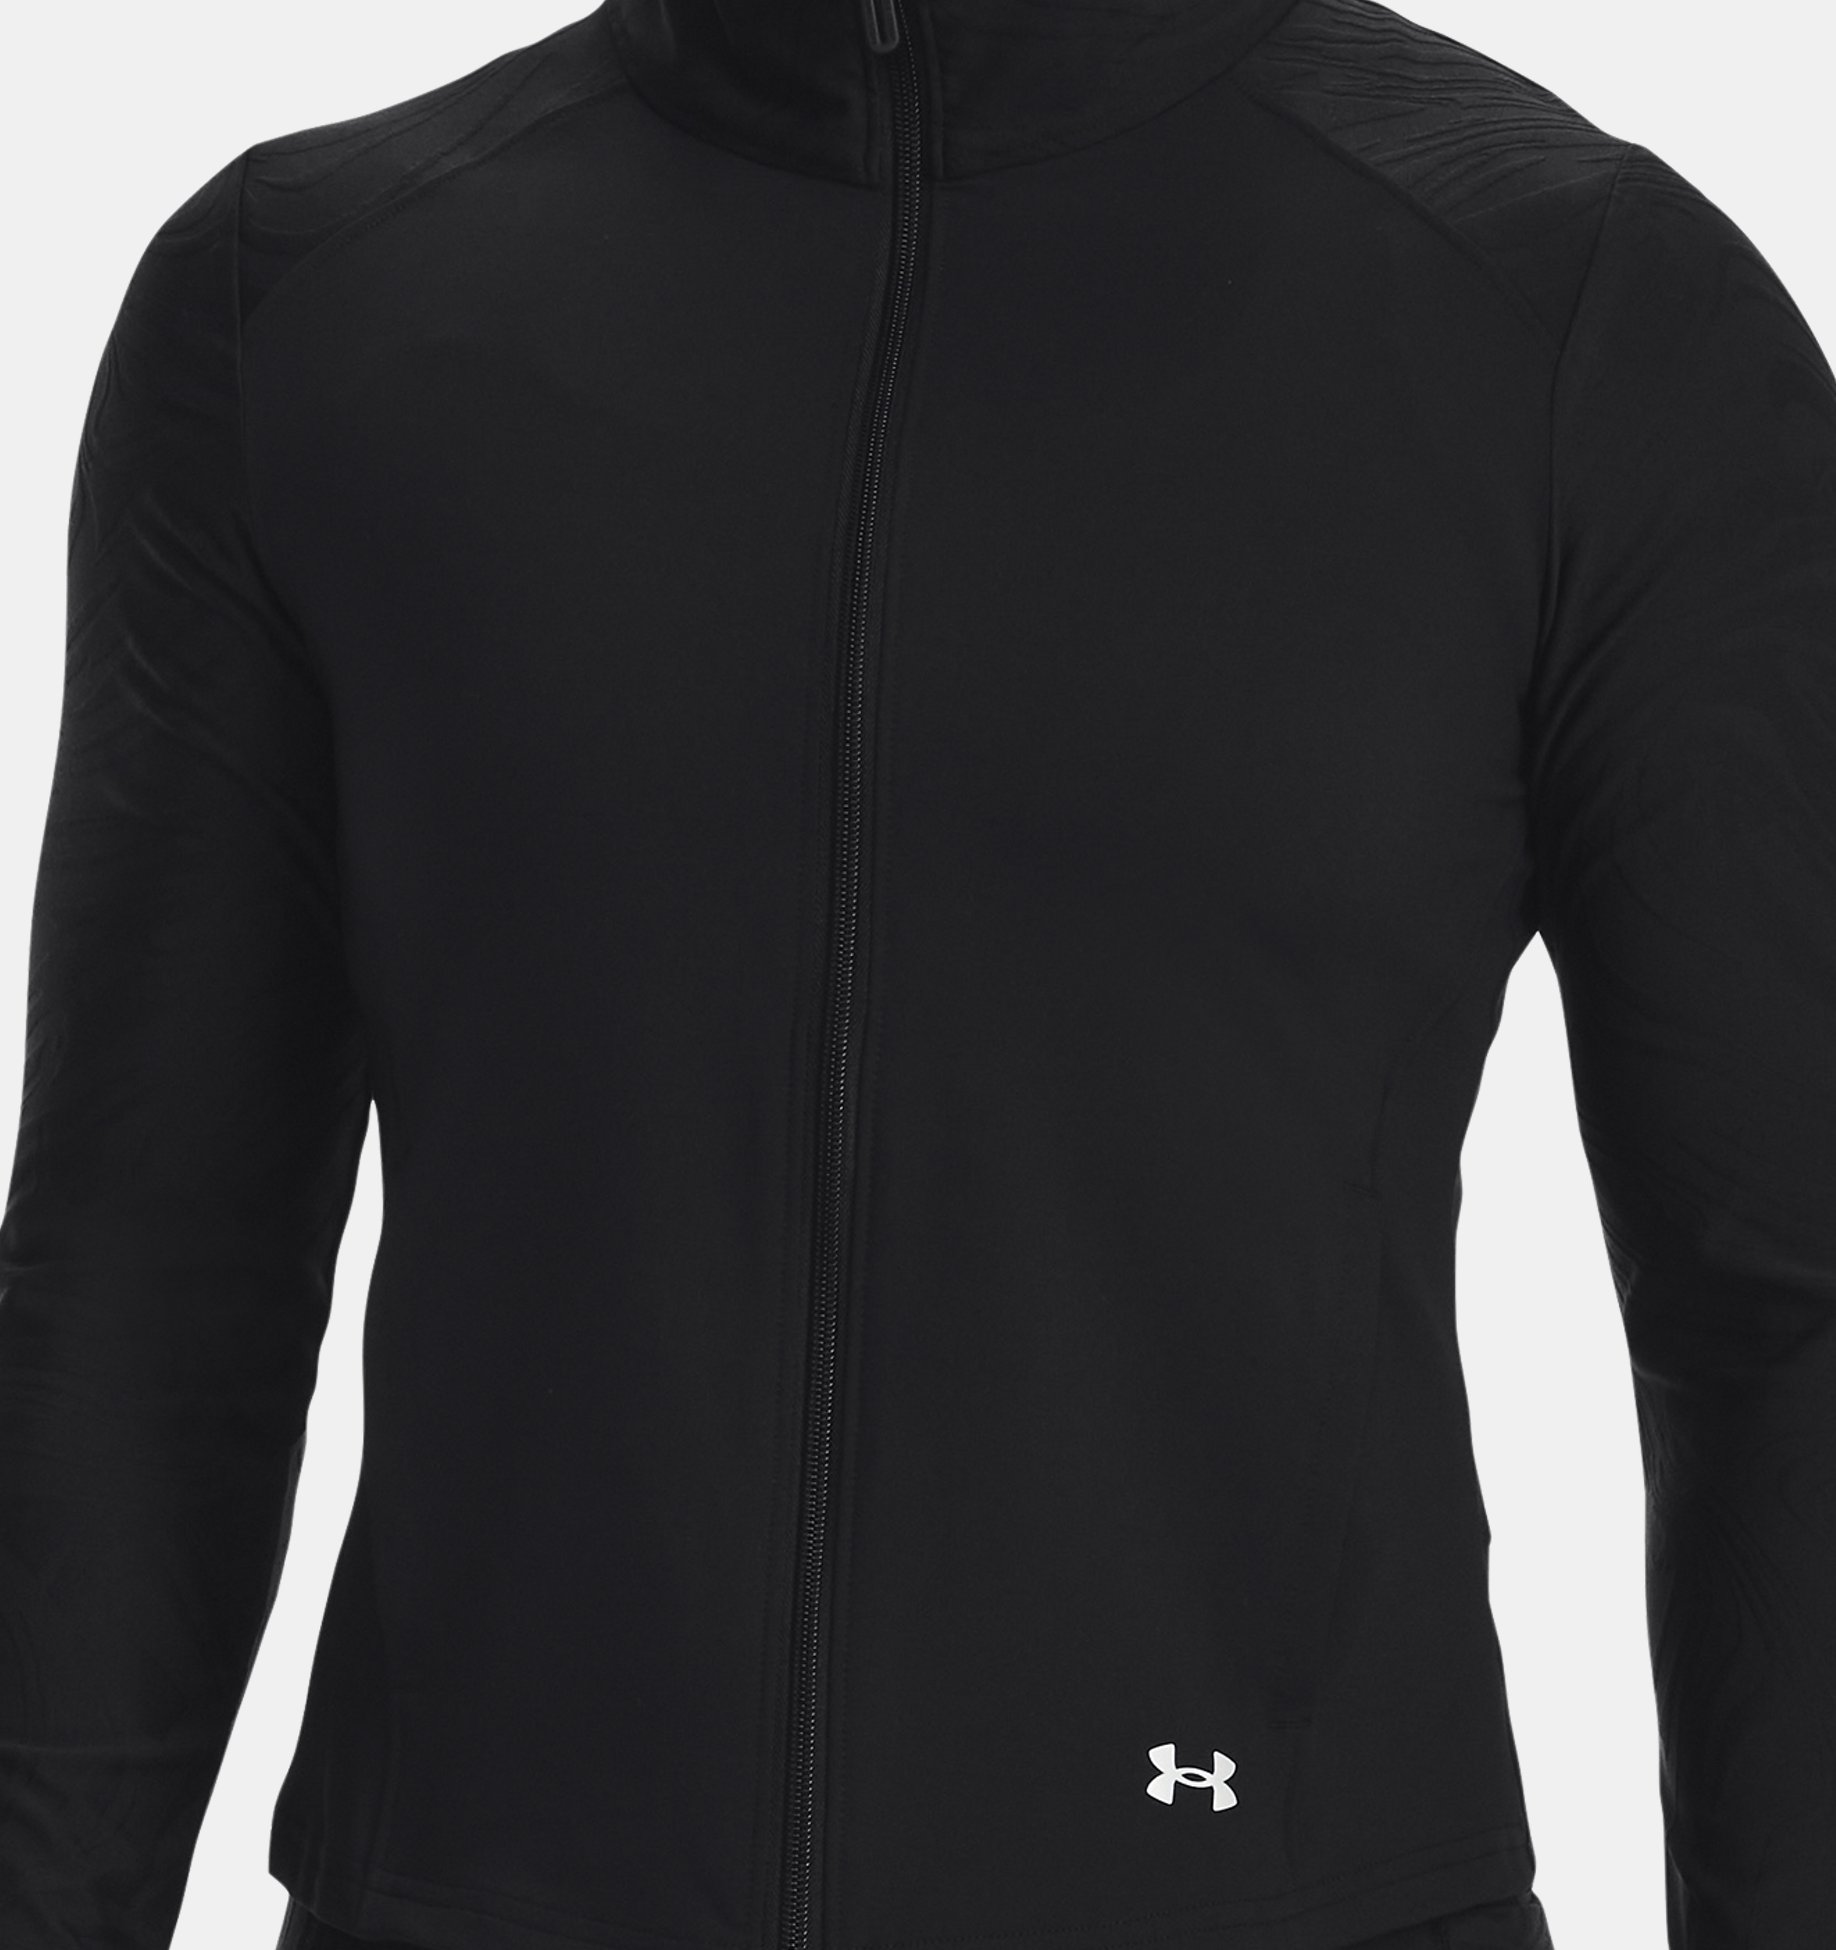 https://underarmour.scene7.com/is/image/Underarmour/V5-1373922-001_FC?rp=standard-0pad|pdpZoomDesktop&scl=0.72&fmt=jpg&qlt=85&resMode=sharp2&cache=on,on&bgc=f0f0f0&wid=1836&hei=1950&size=1500,1500